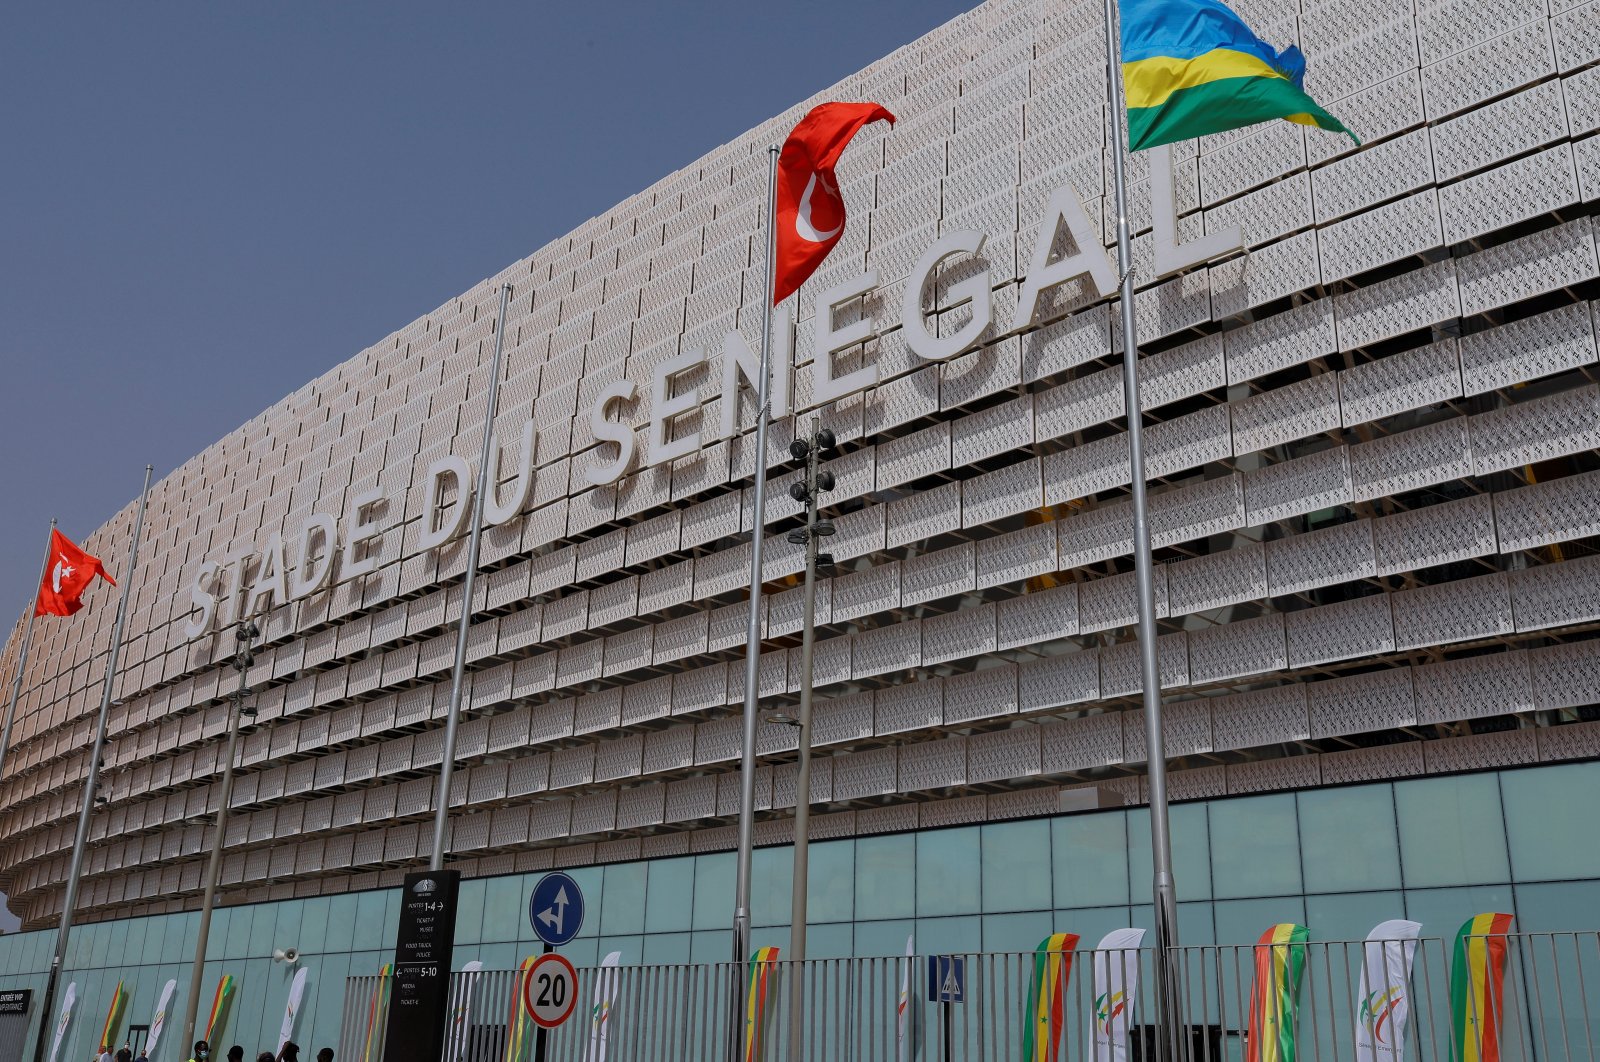 Senegal&#039;s new Turkish-built football stadium is pictured during the inauguration ceremony in Diamniadio, Senegal, Feb. 22, 2022. (Reuters Photo)